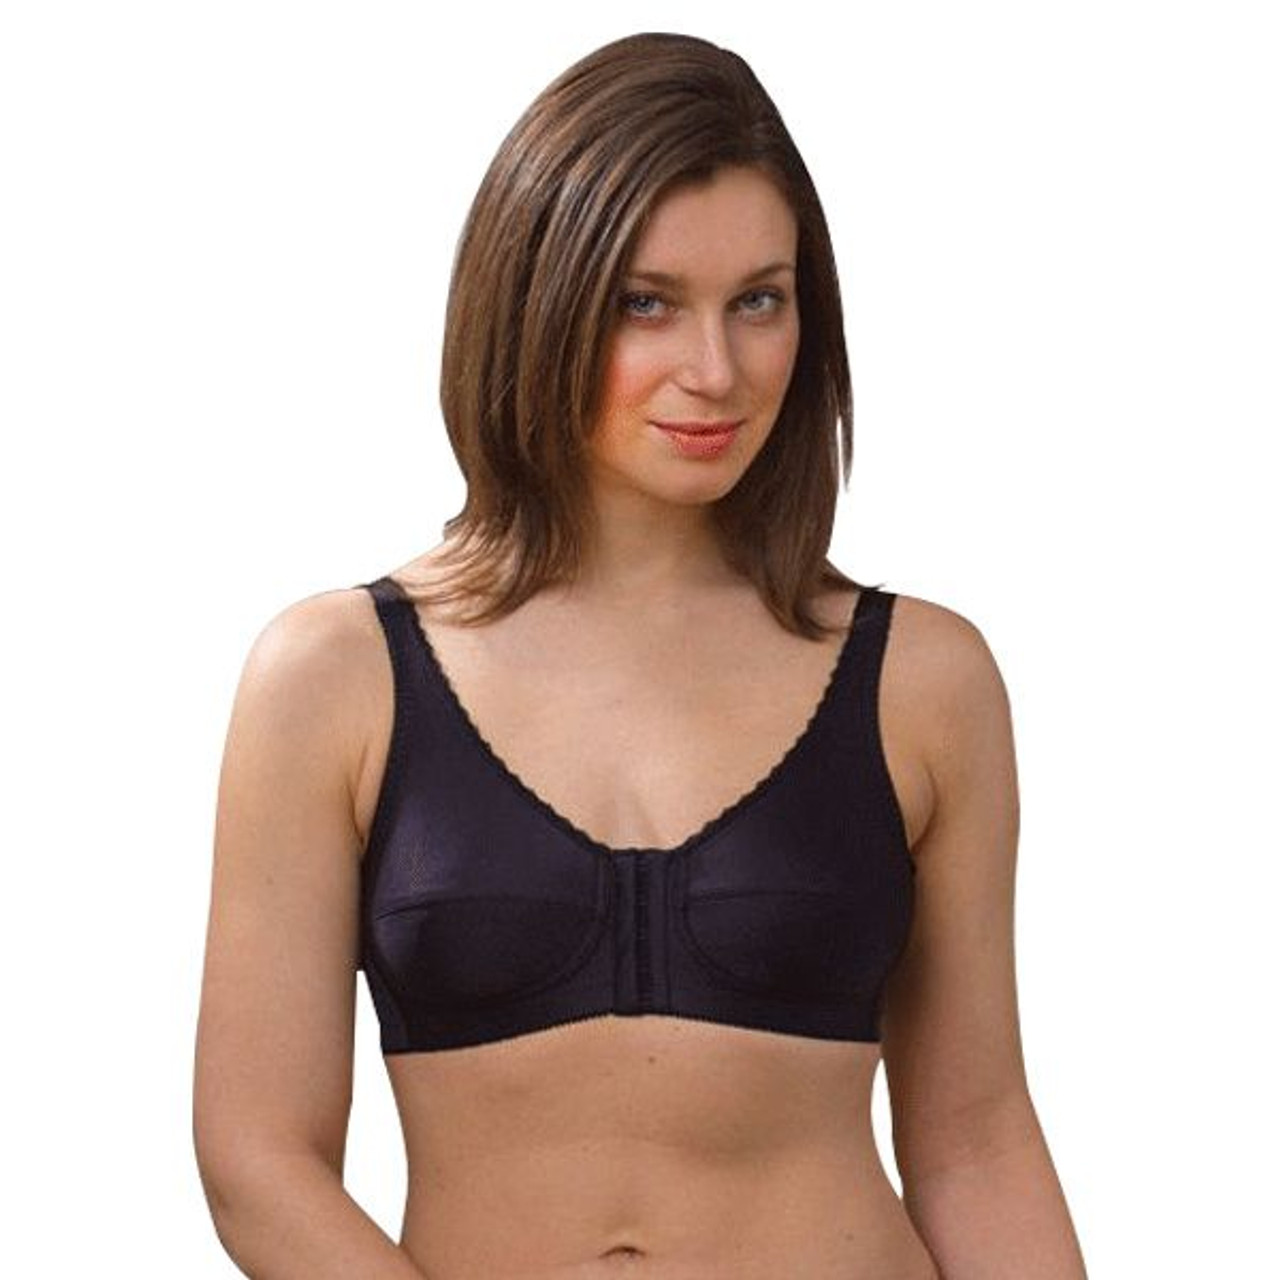 Women - Breast Cancer & Mastectomy - Bras - Shop By Brand - Almost